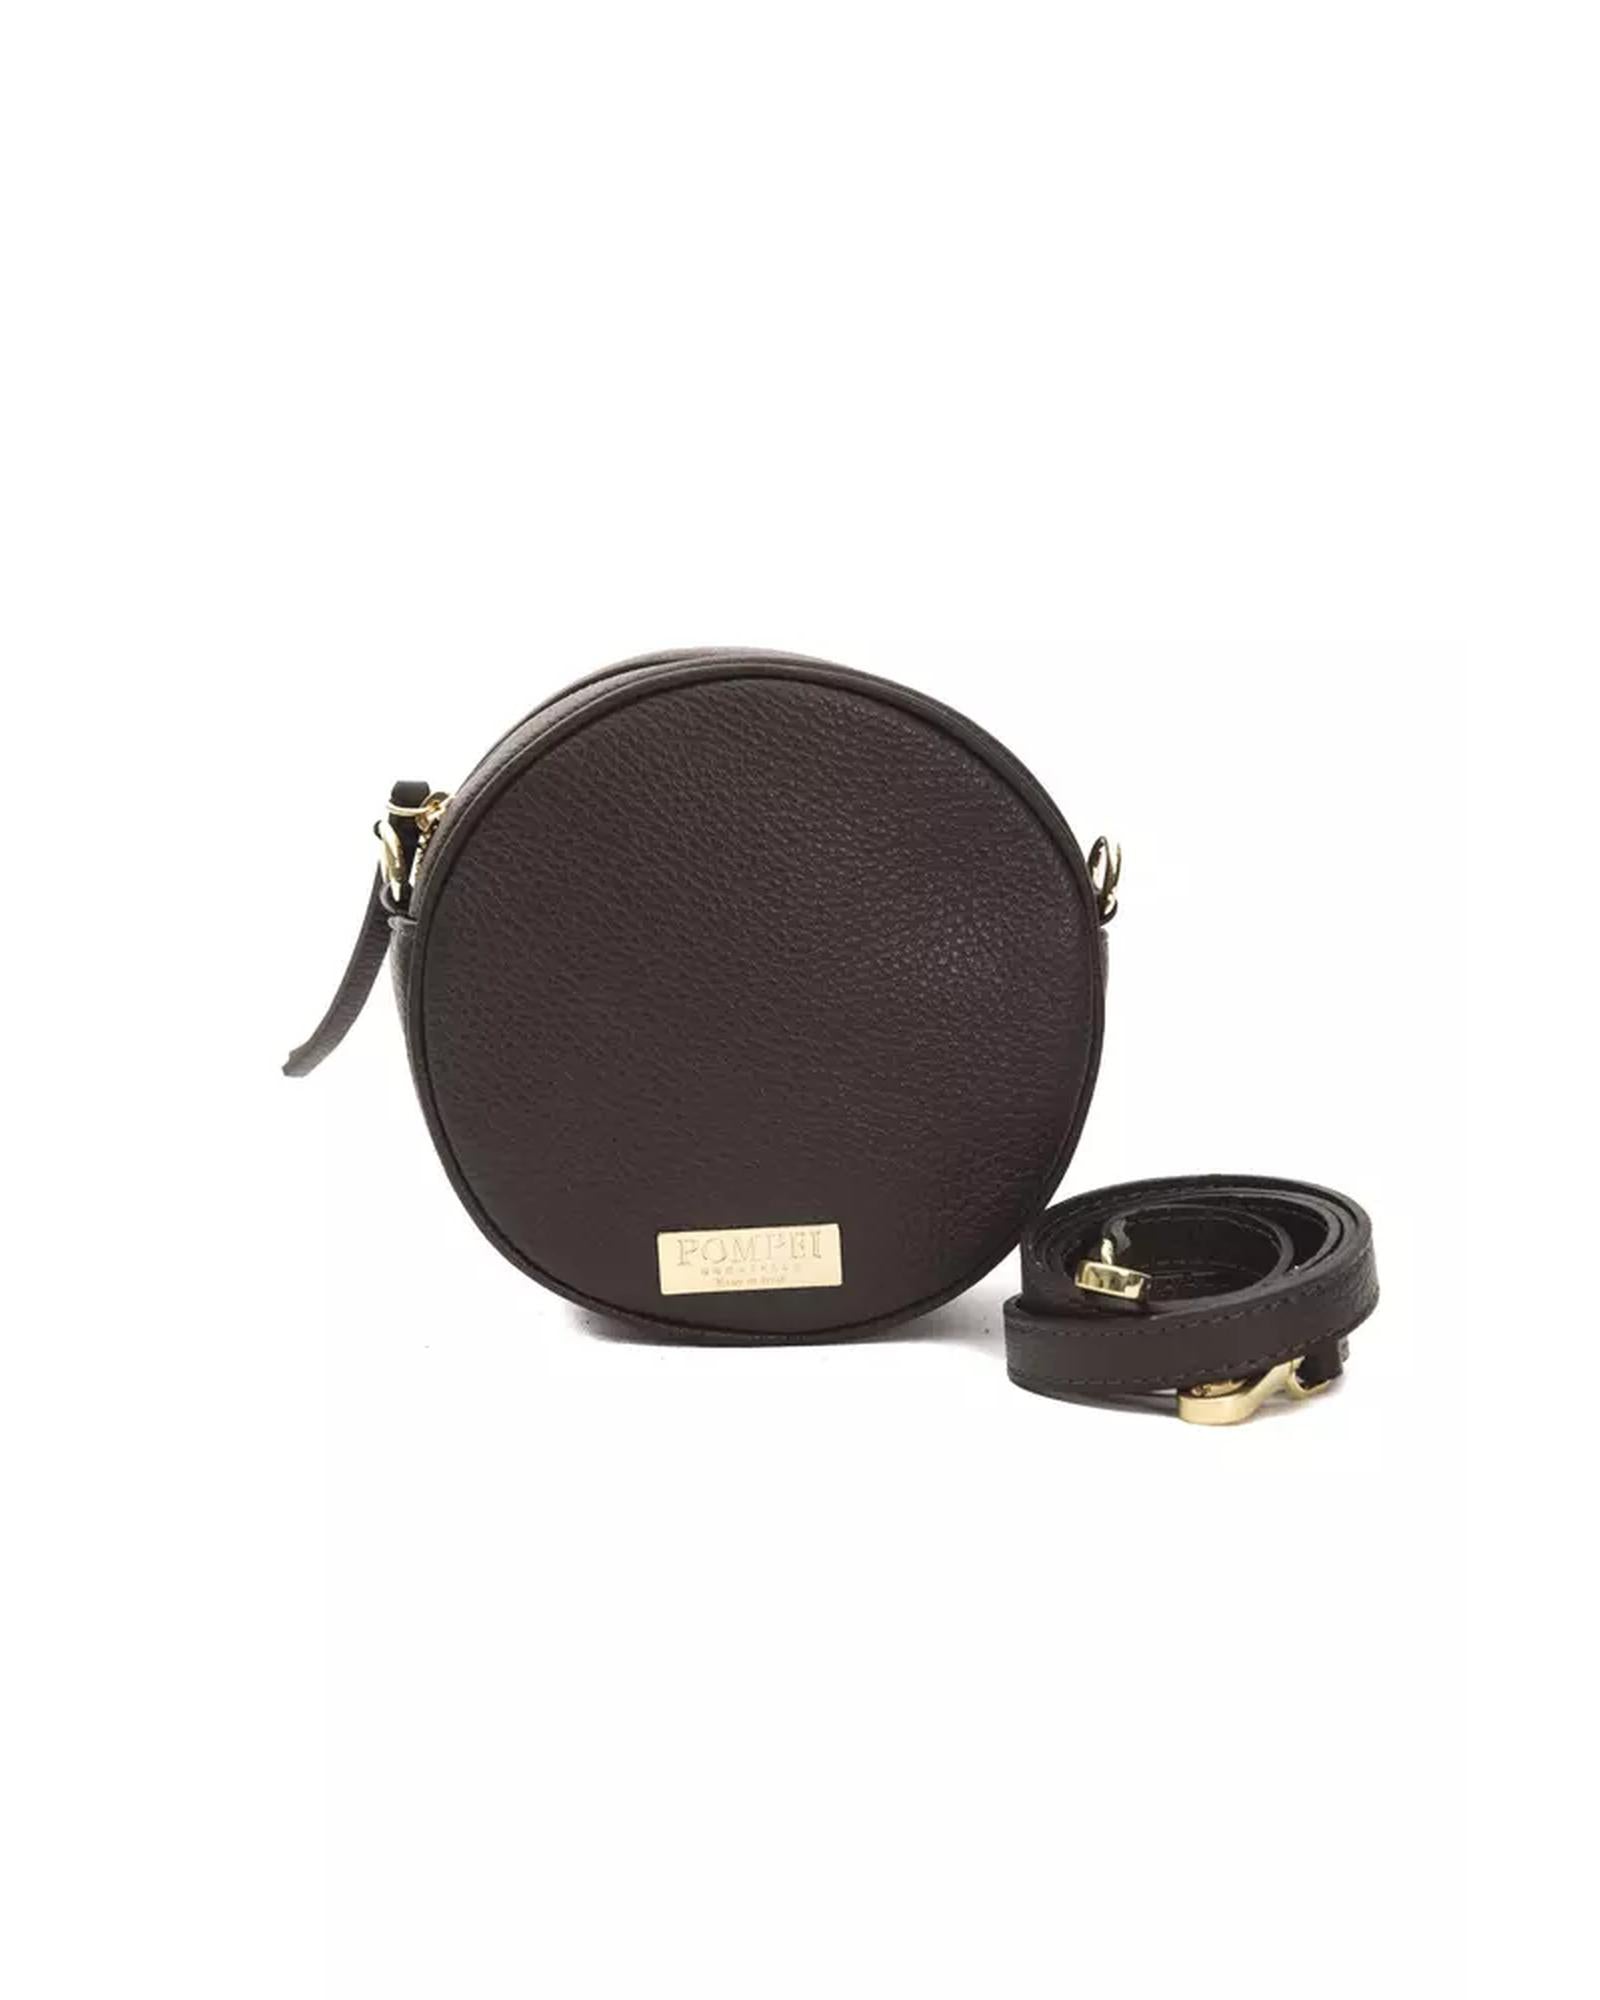 Small Oval Crossbody Bag with Dustbag Included and Visible Logo One Size Women